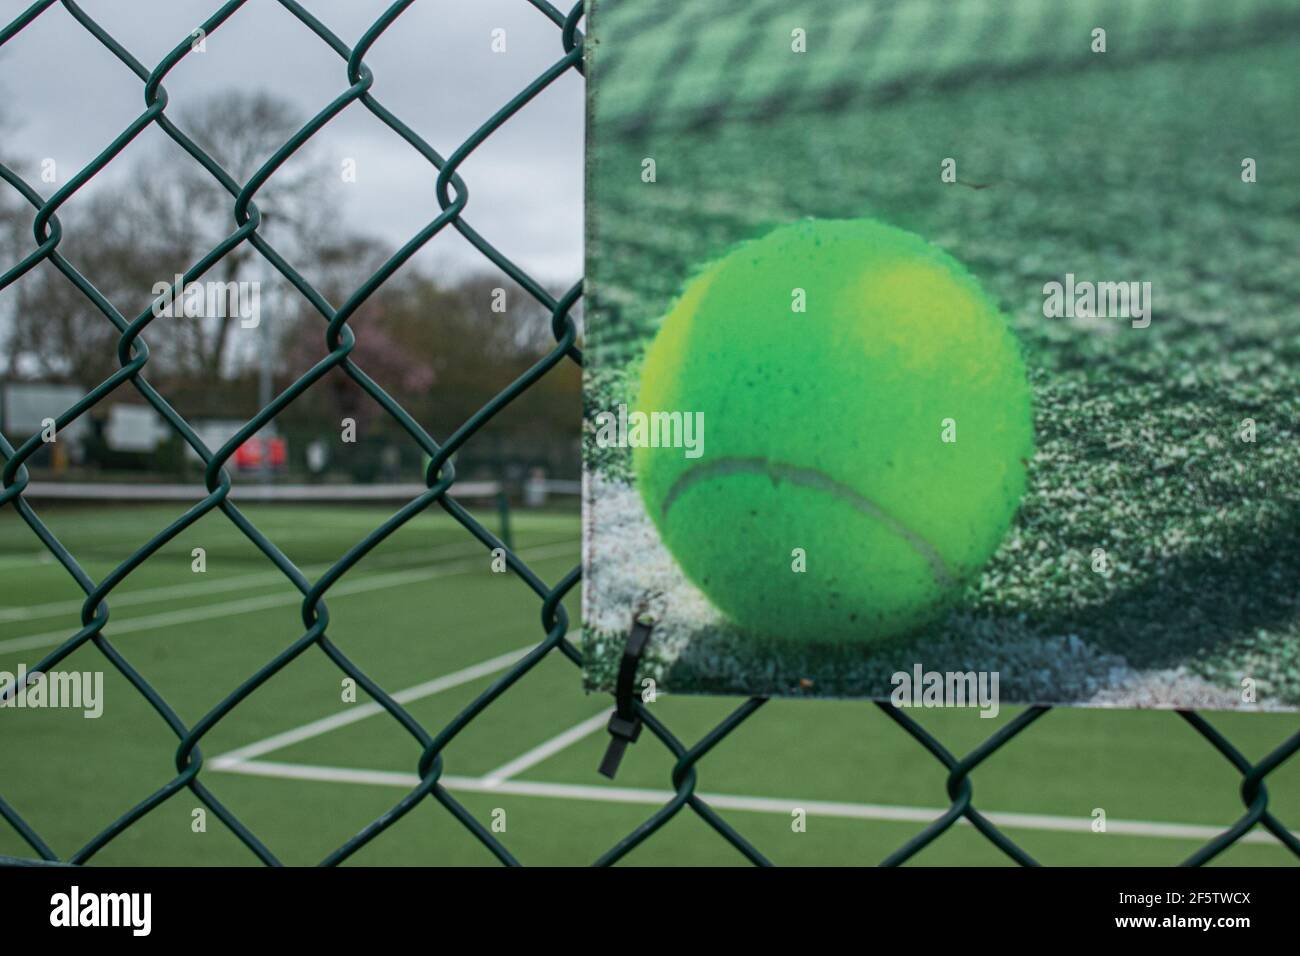 Page 2 - The Lawn Tennis Association High Resolution Stock Photography and  Images - Alamy